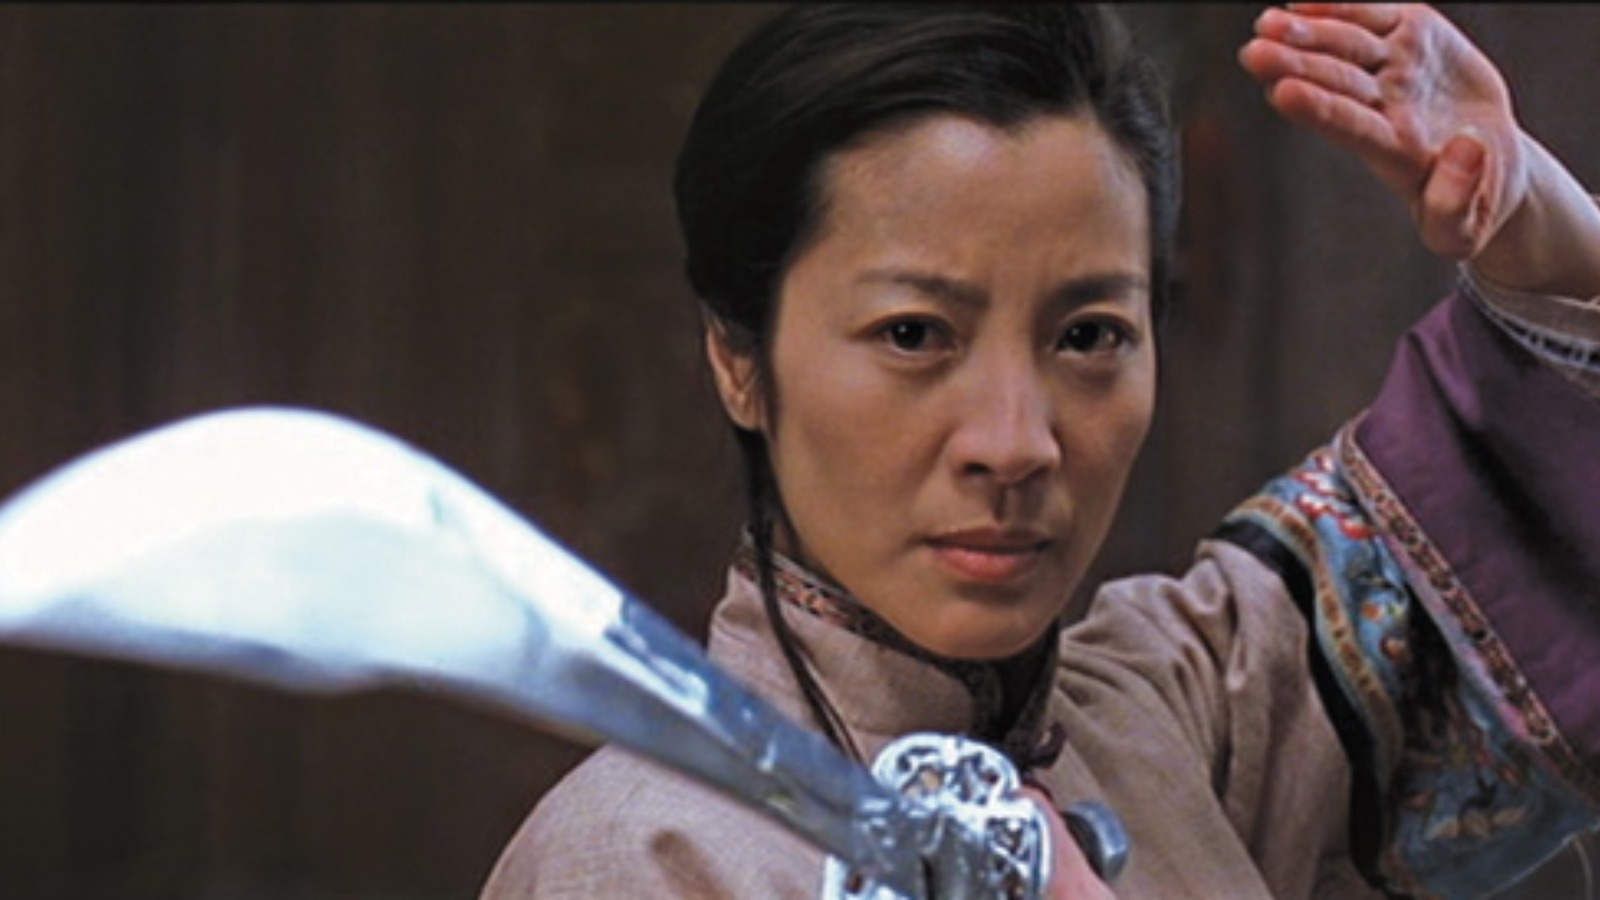 Crouching Tiger, Hidden Dragon returns to theaters in February